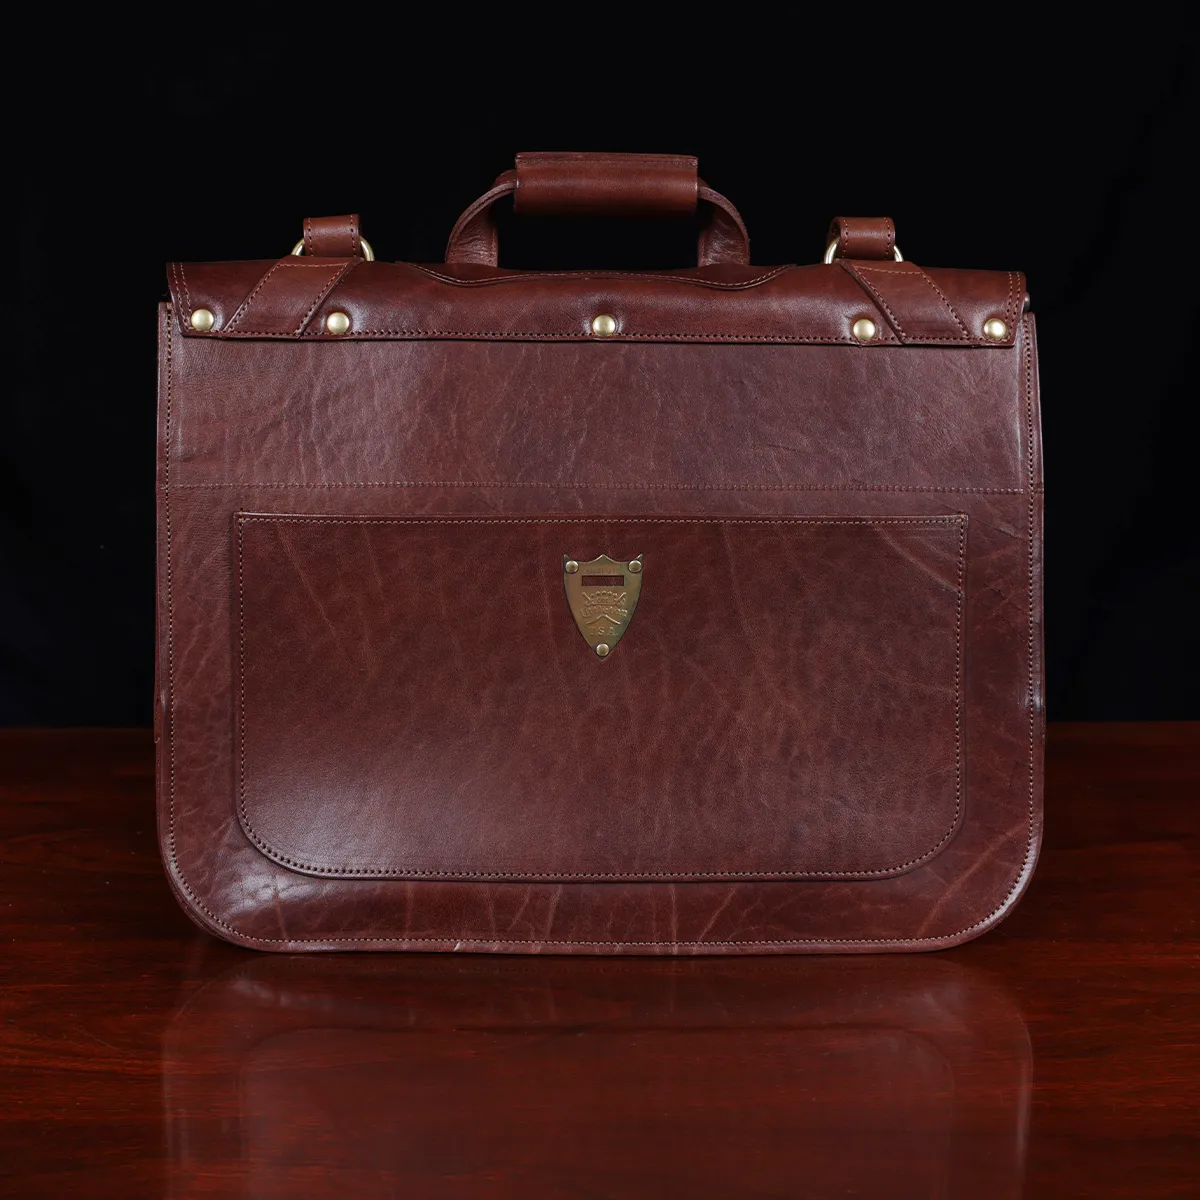 Handmade leather briefcase and leather laptop bag - Cooper Satchel